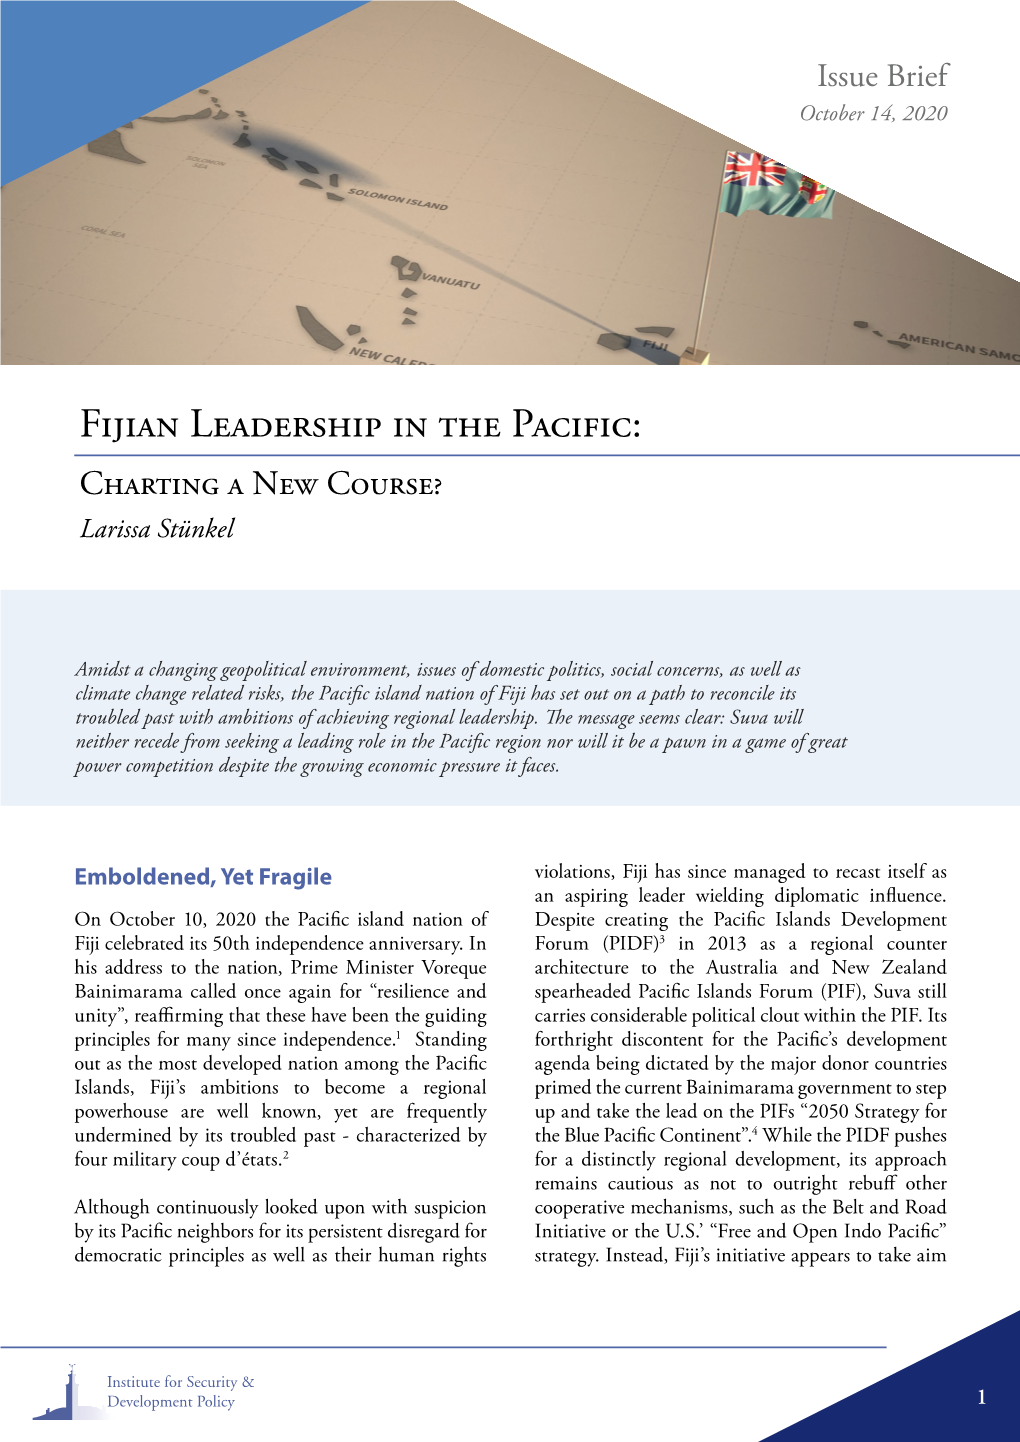 Fijian Leadership in the Pacific: Charting a New Course? Larissa Stünkel